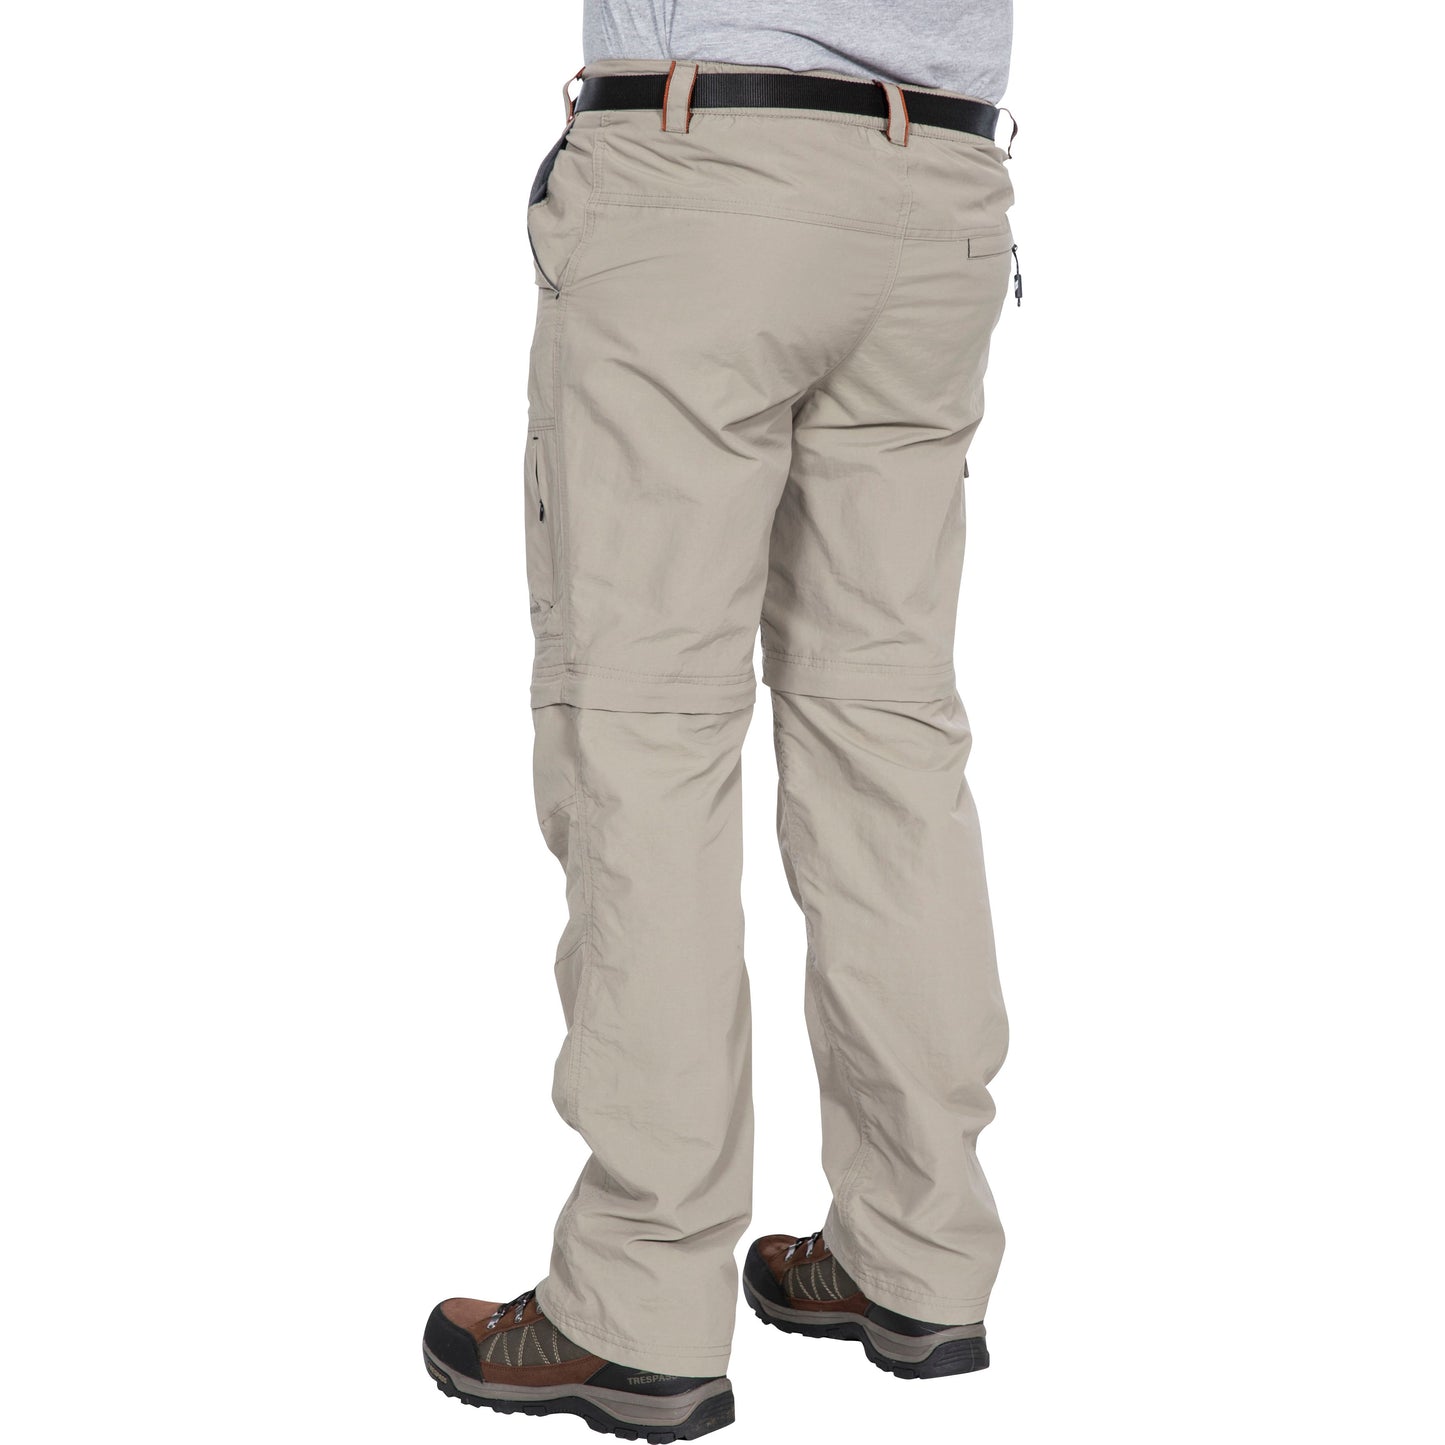 Rynne - Mens Active Zipoff Trousers - Bamboo